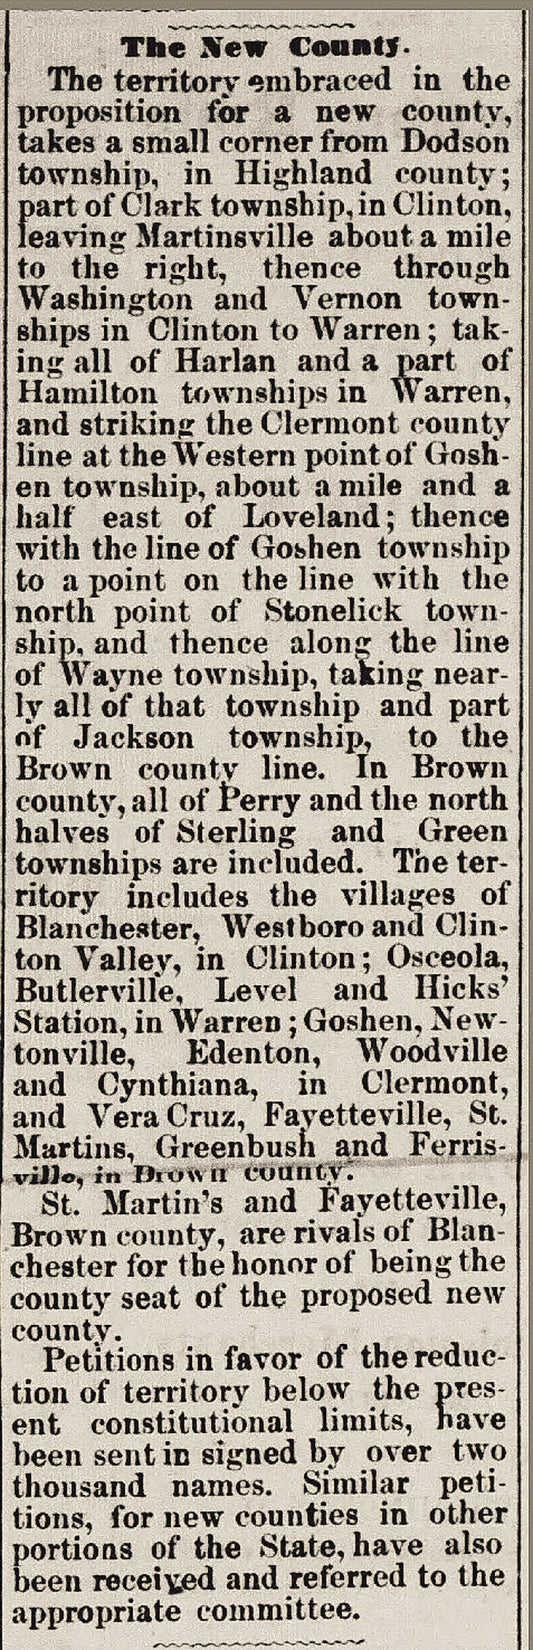 1873. New county proposal.